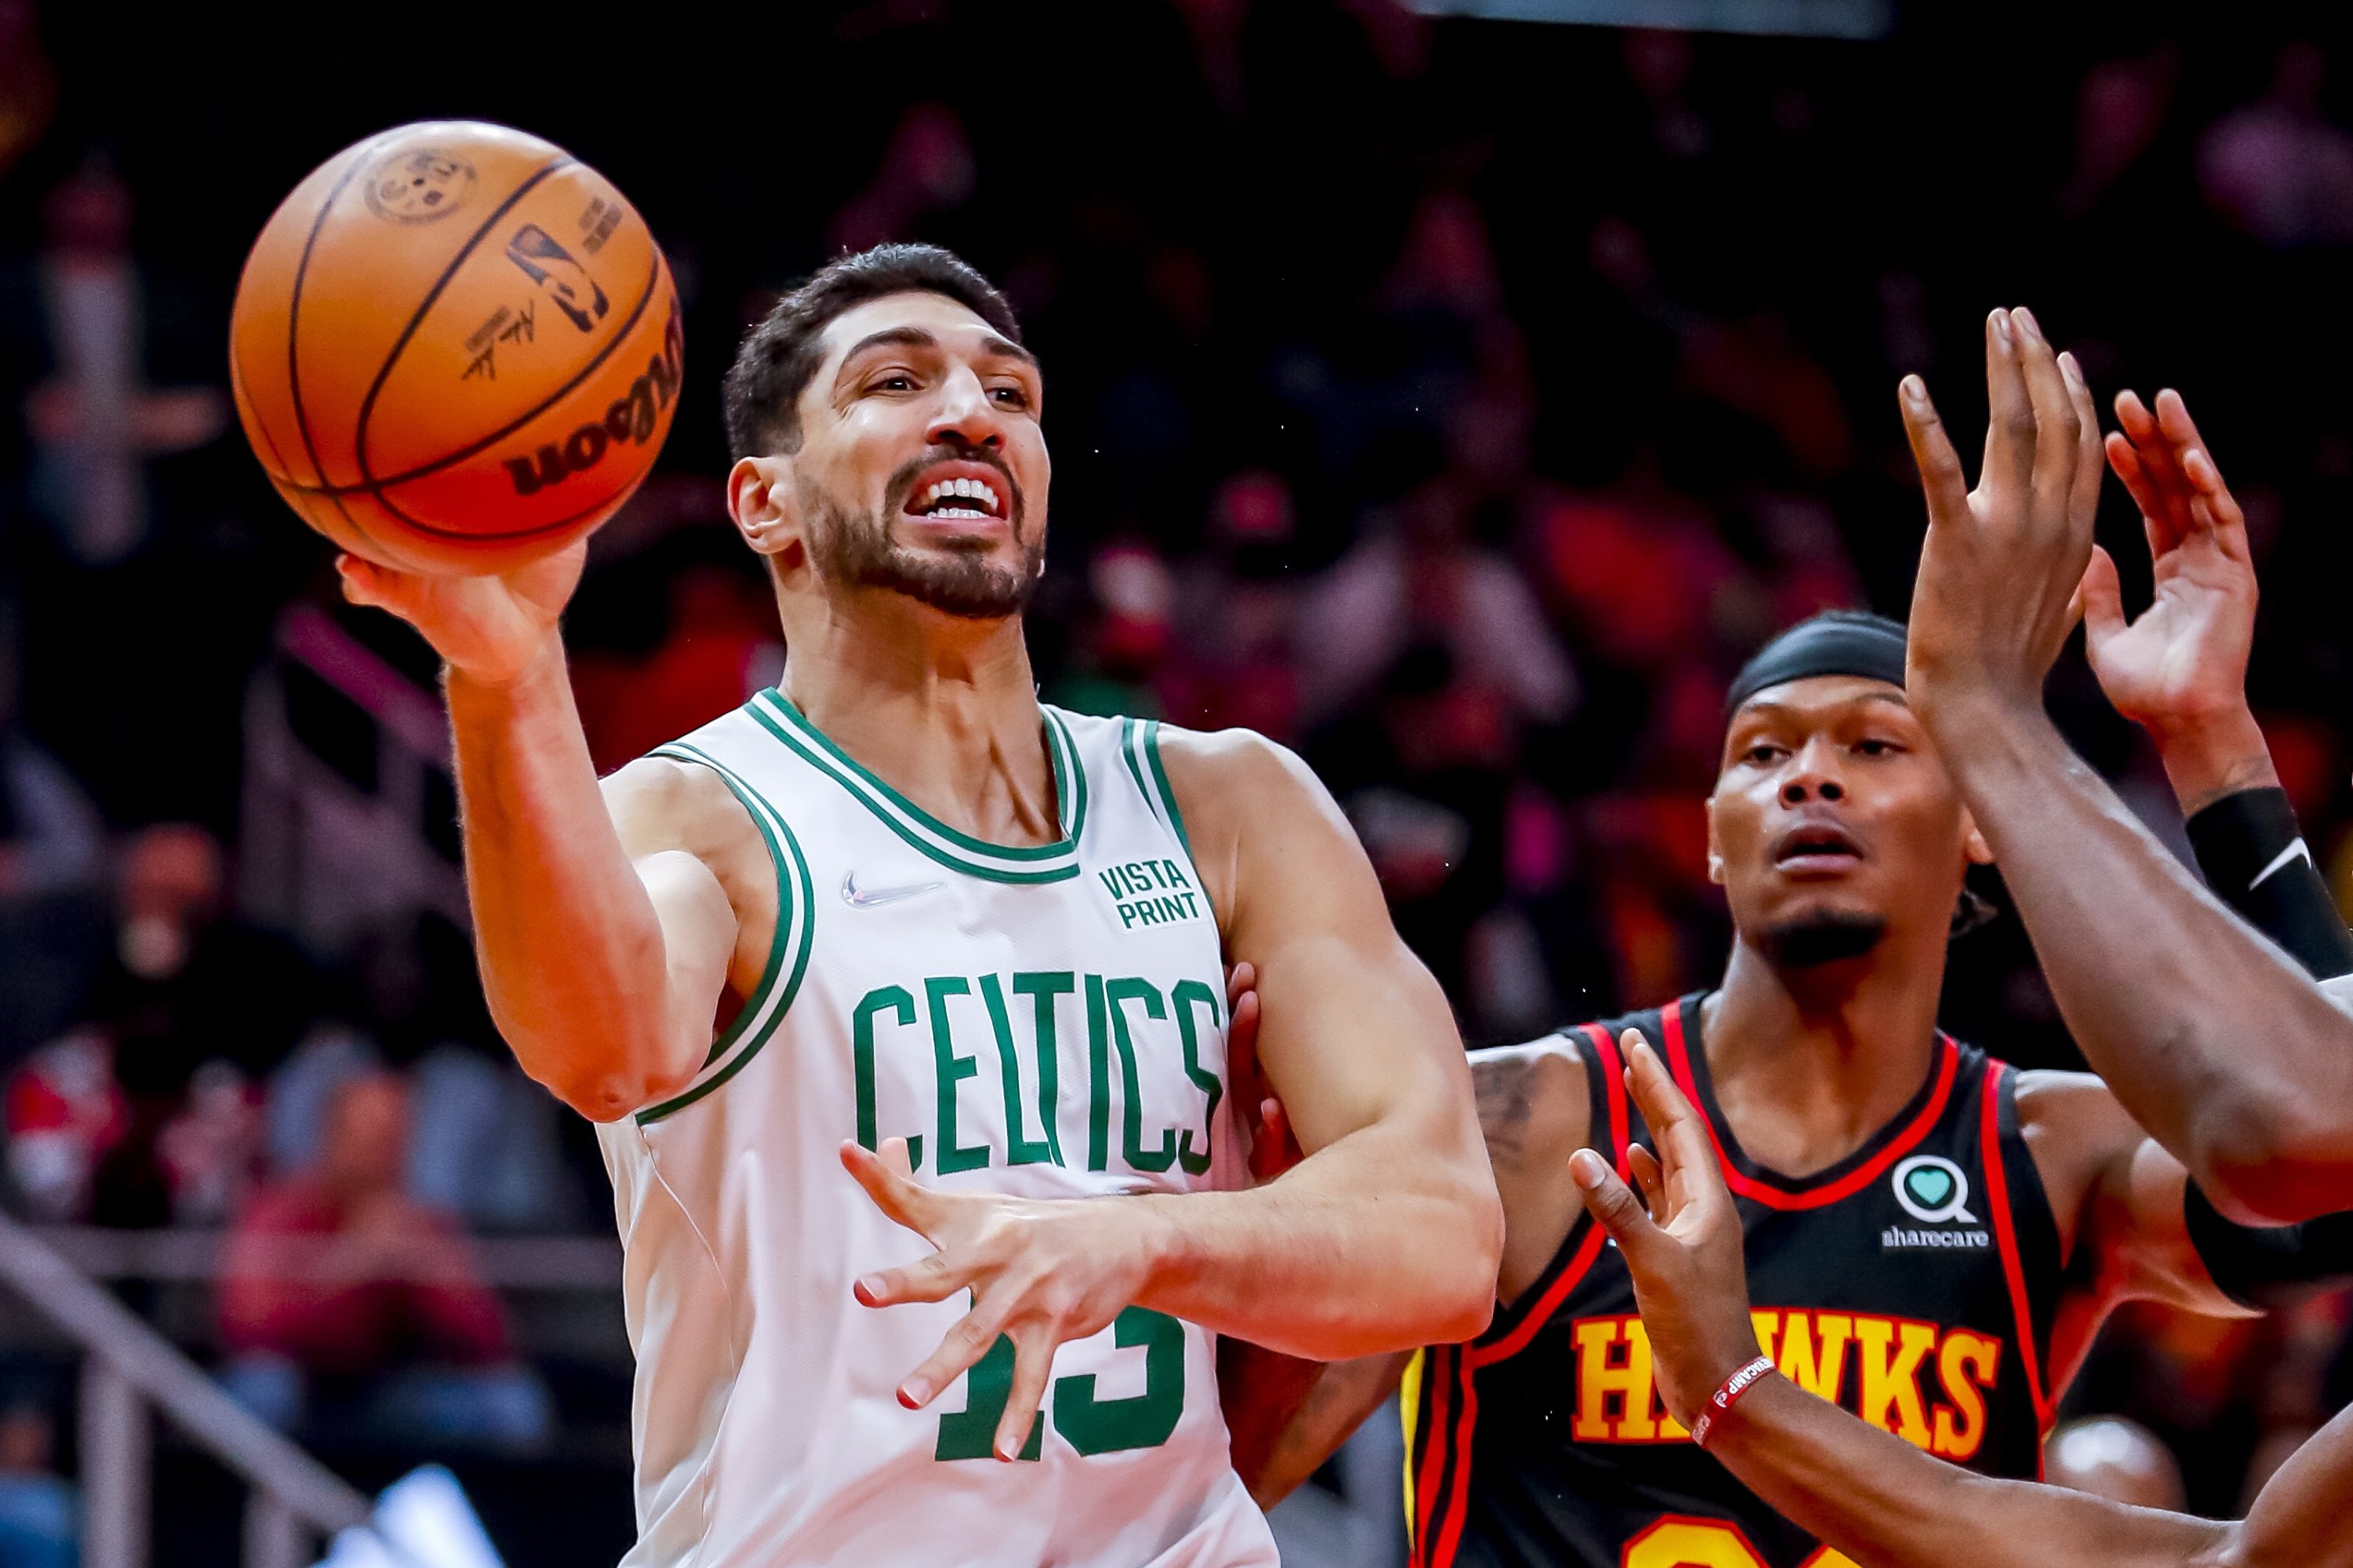 Enes Kanter: Turkish NBA star changes name to 'Freedom' to